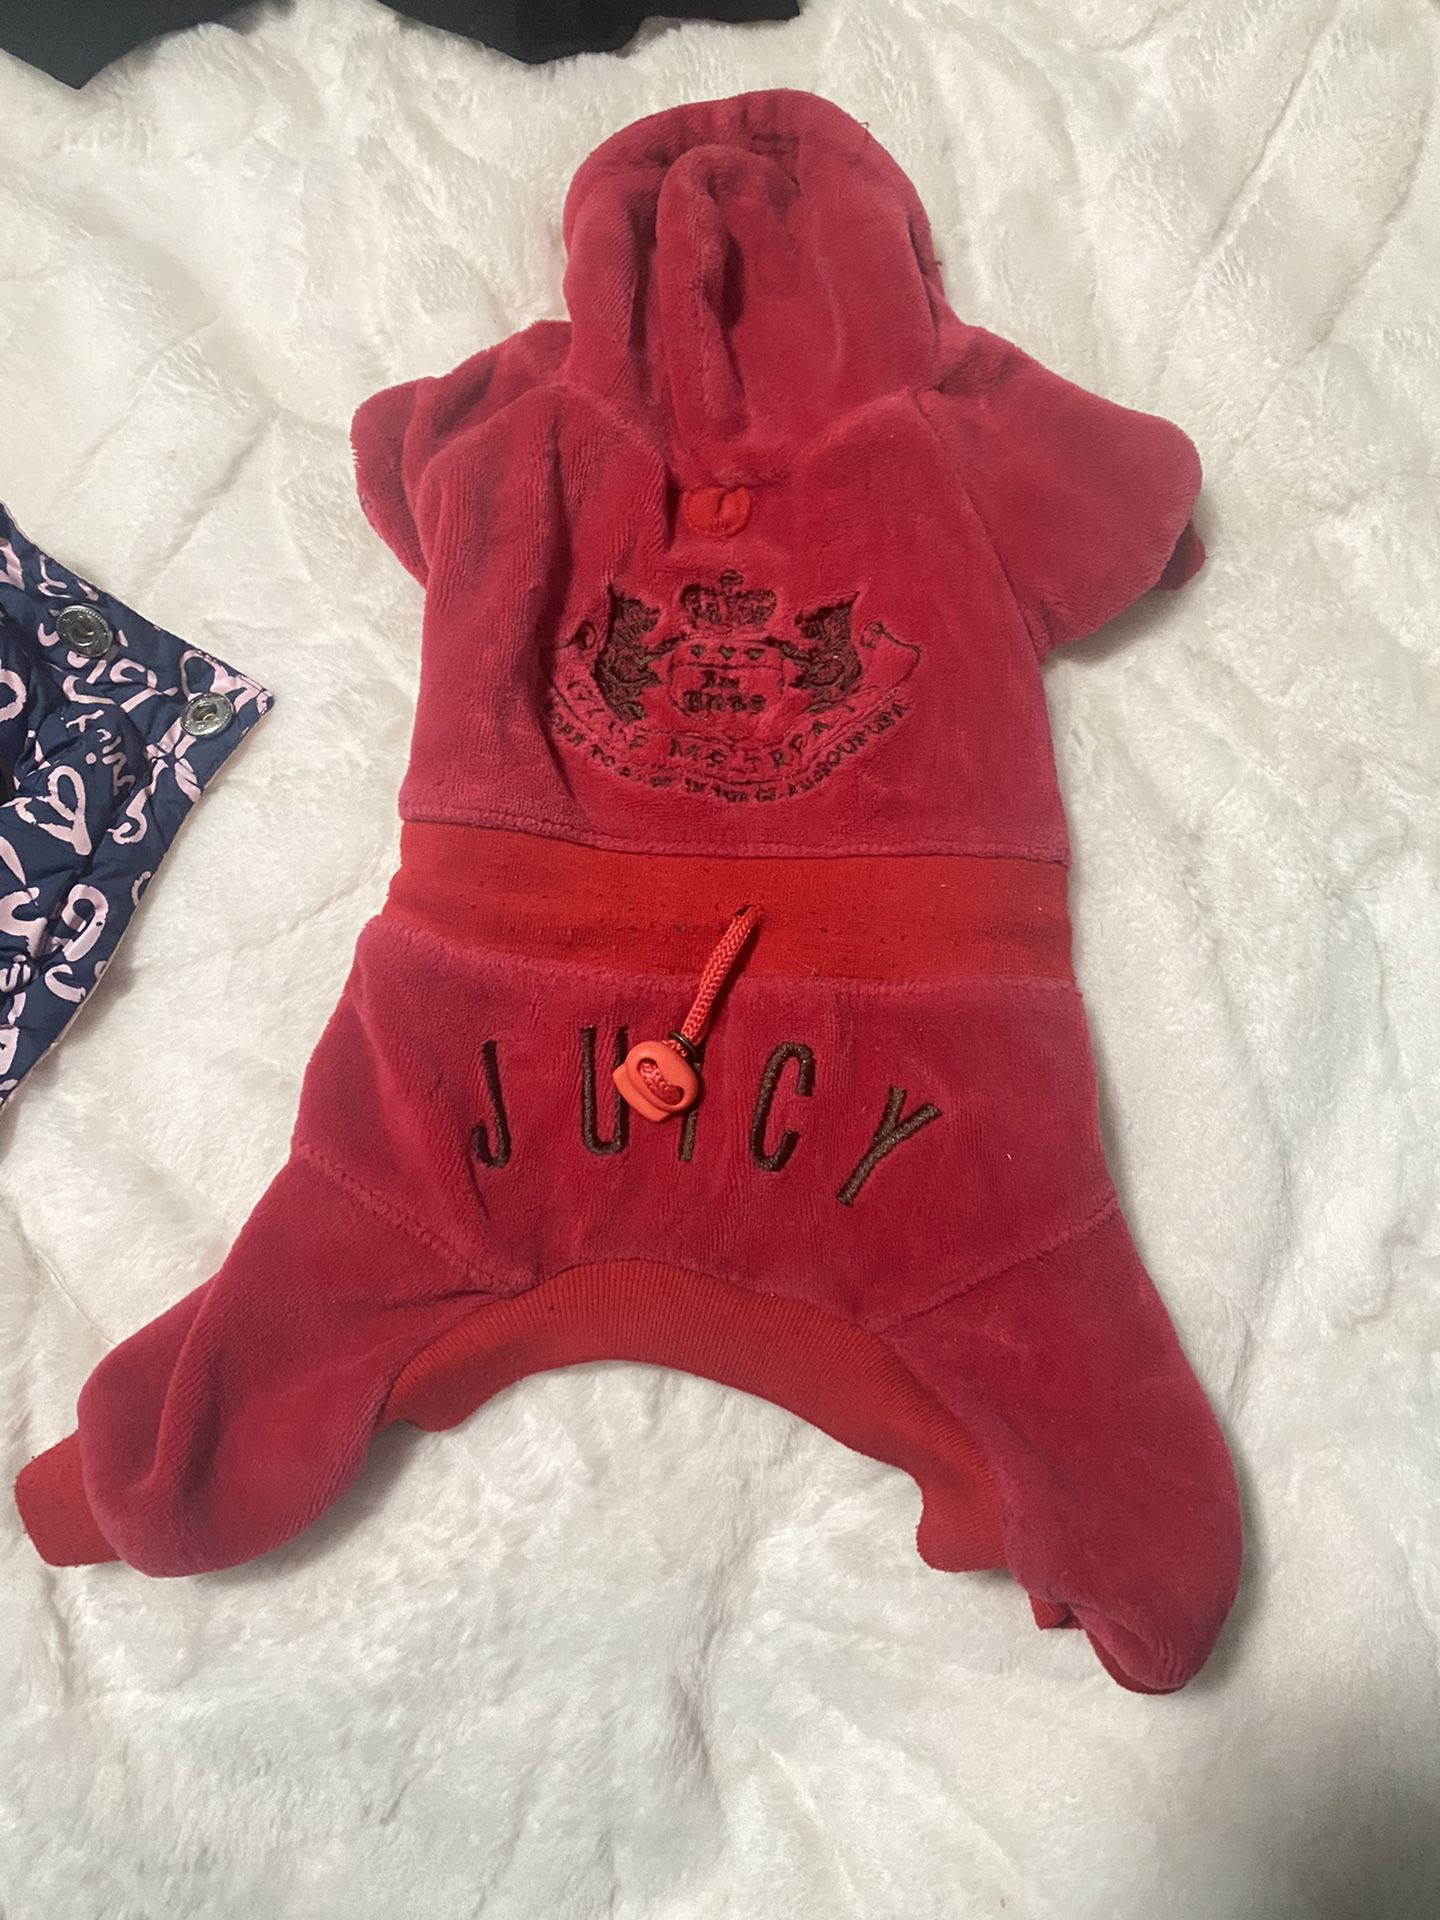 Dog Juicy Couture Jumpsuit Size Small